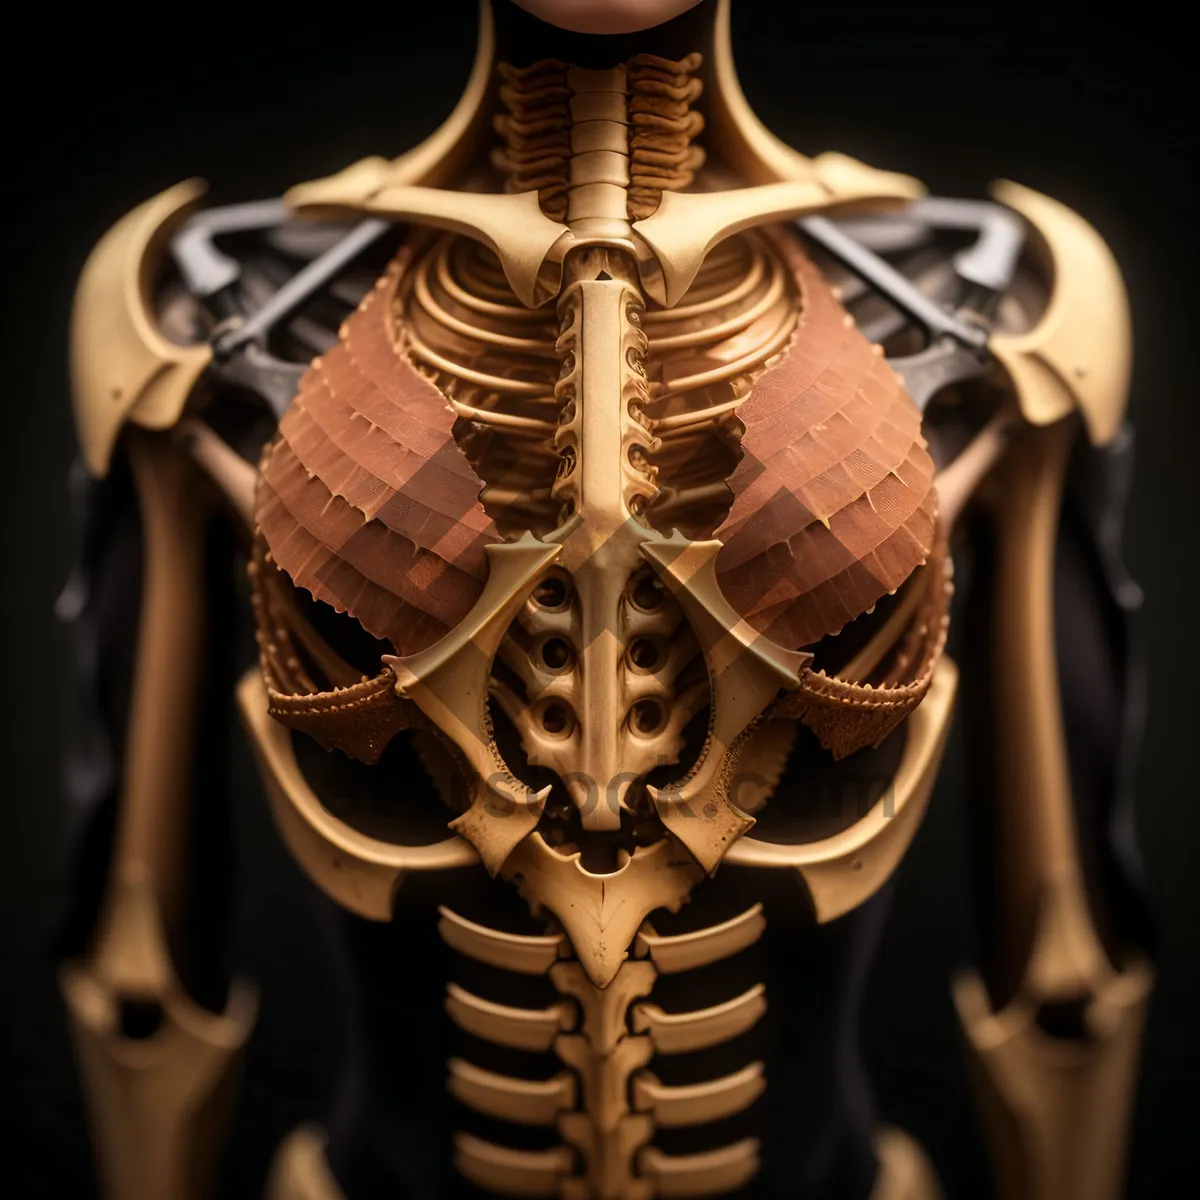 Picture of Human Skeleton Anatomy 3D X-Ray Graphic